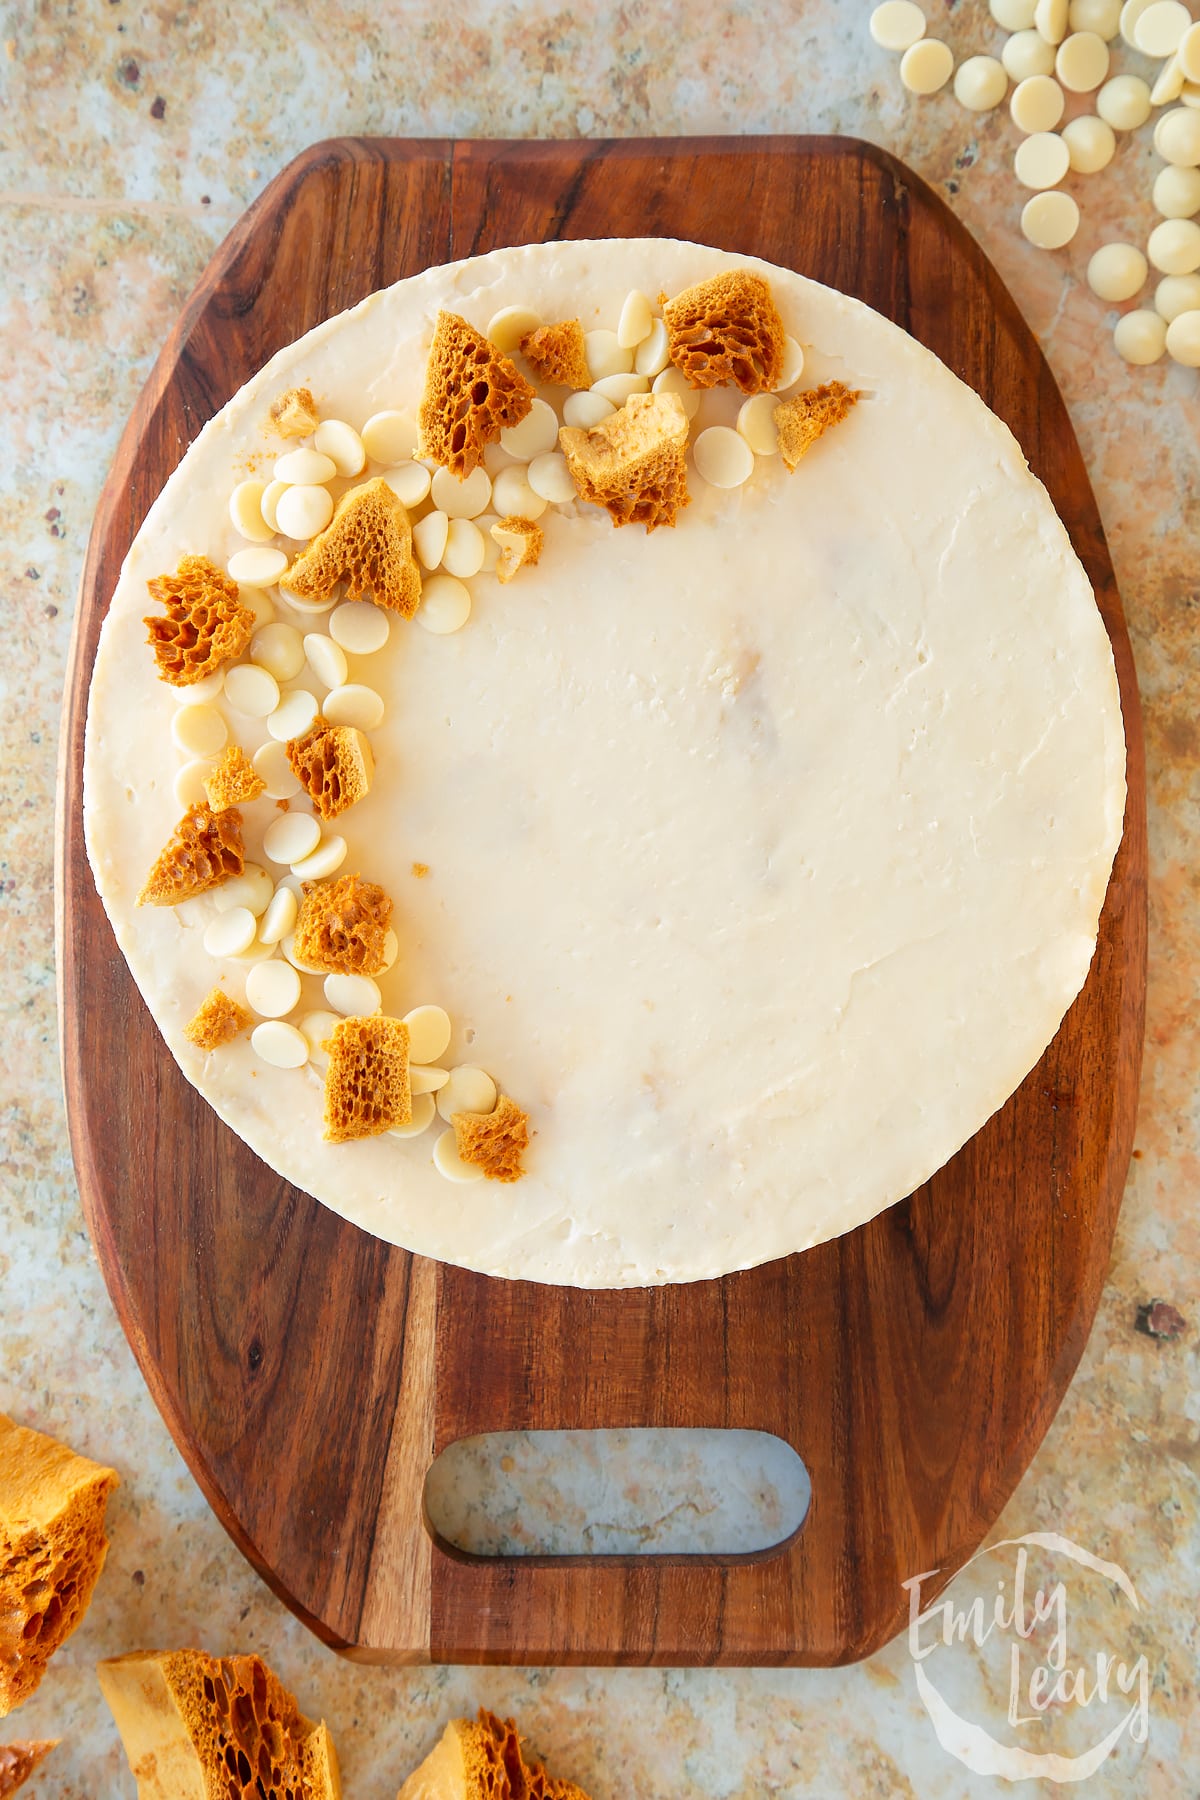 an overhead view of a White chocolate and honeycomb cheesecake on a wooden chopping board.